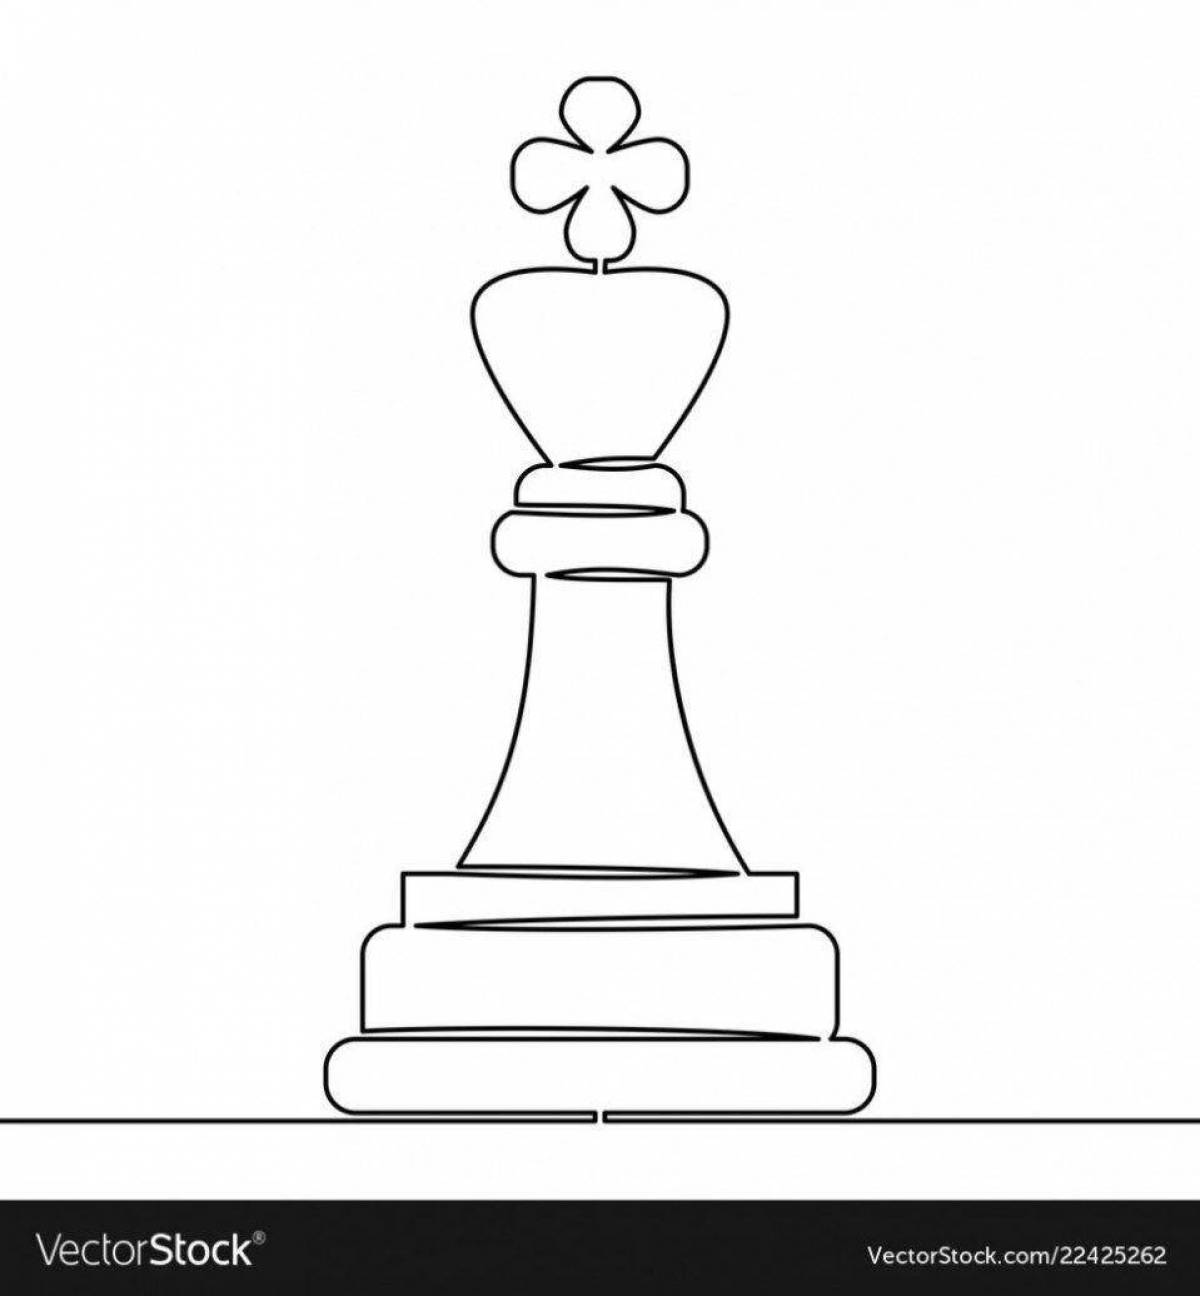 Coloring book shiny chess king